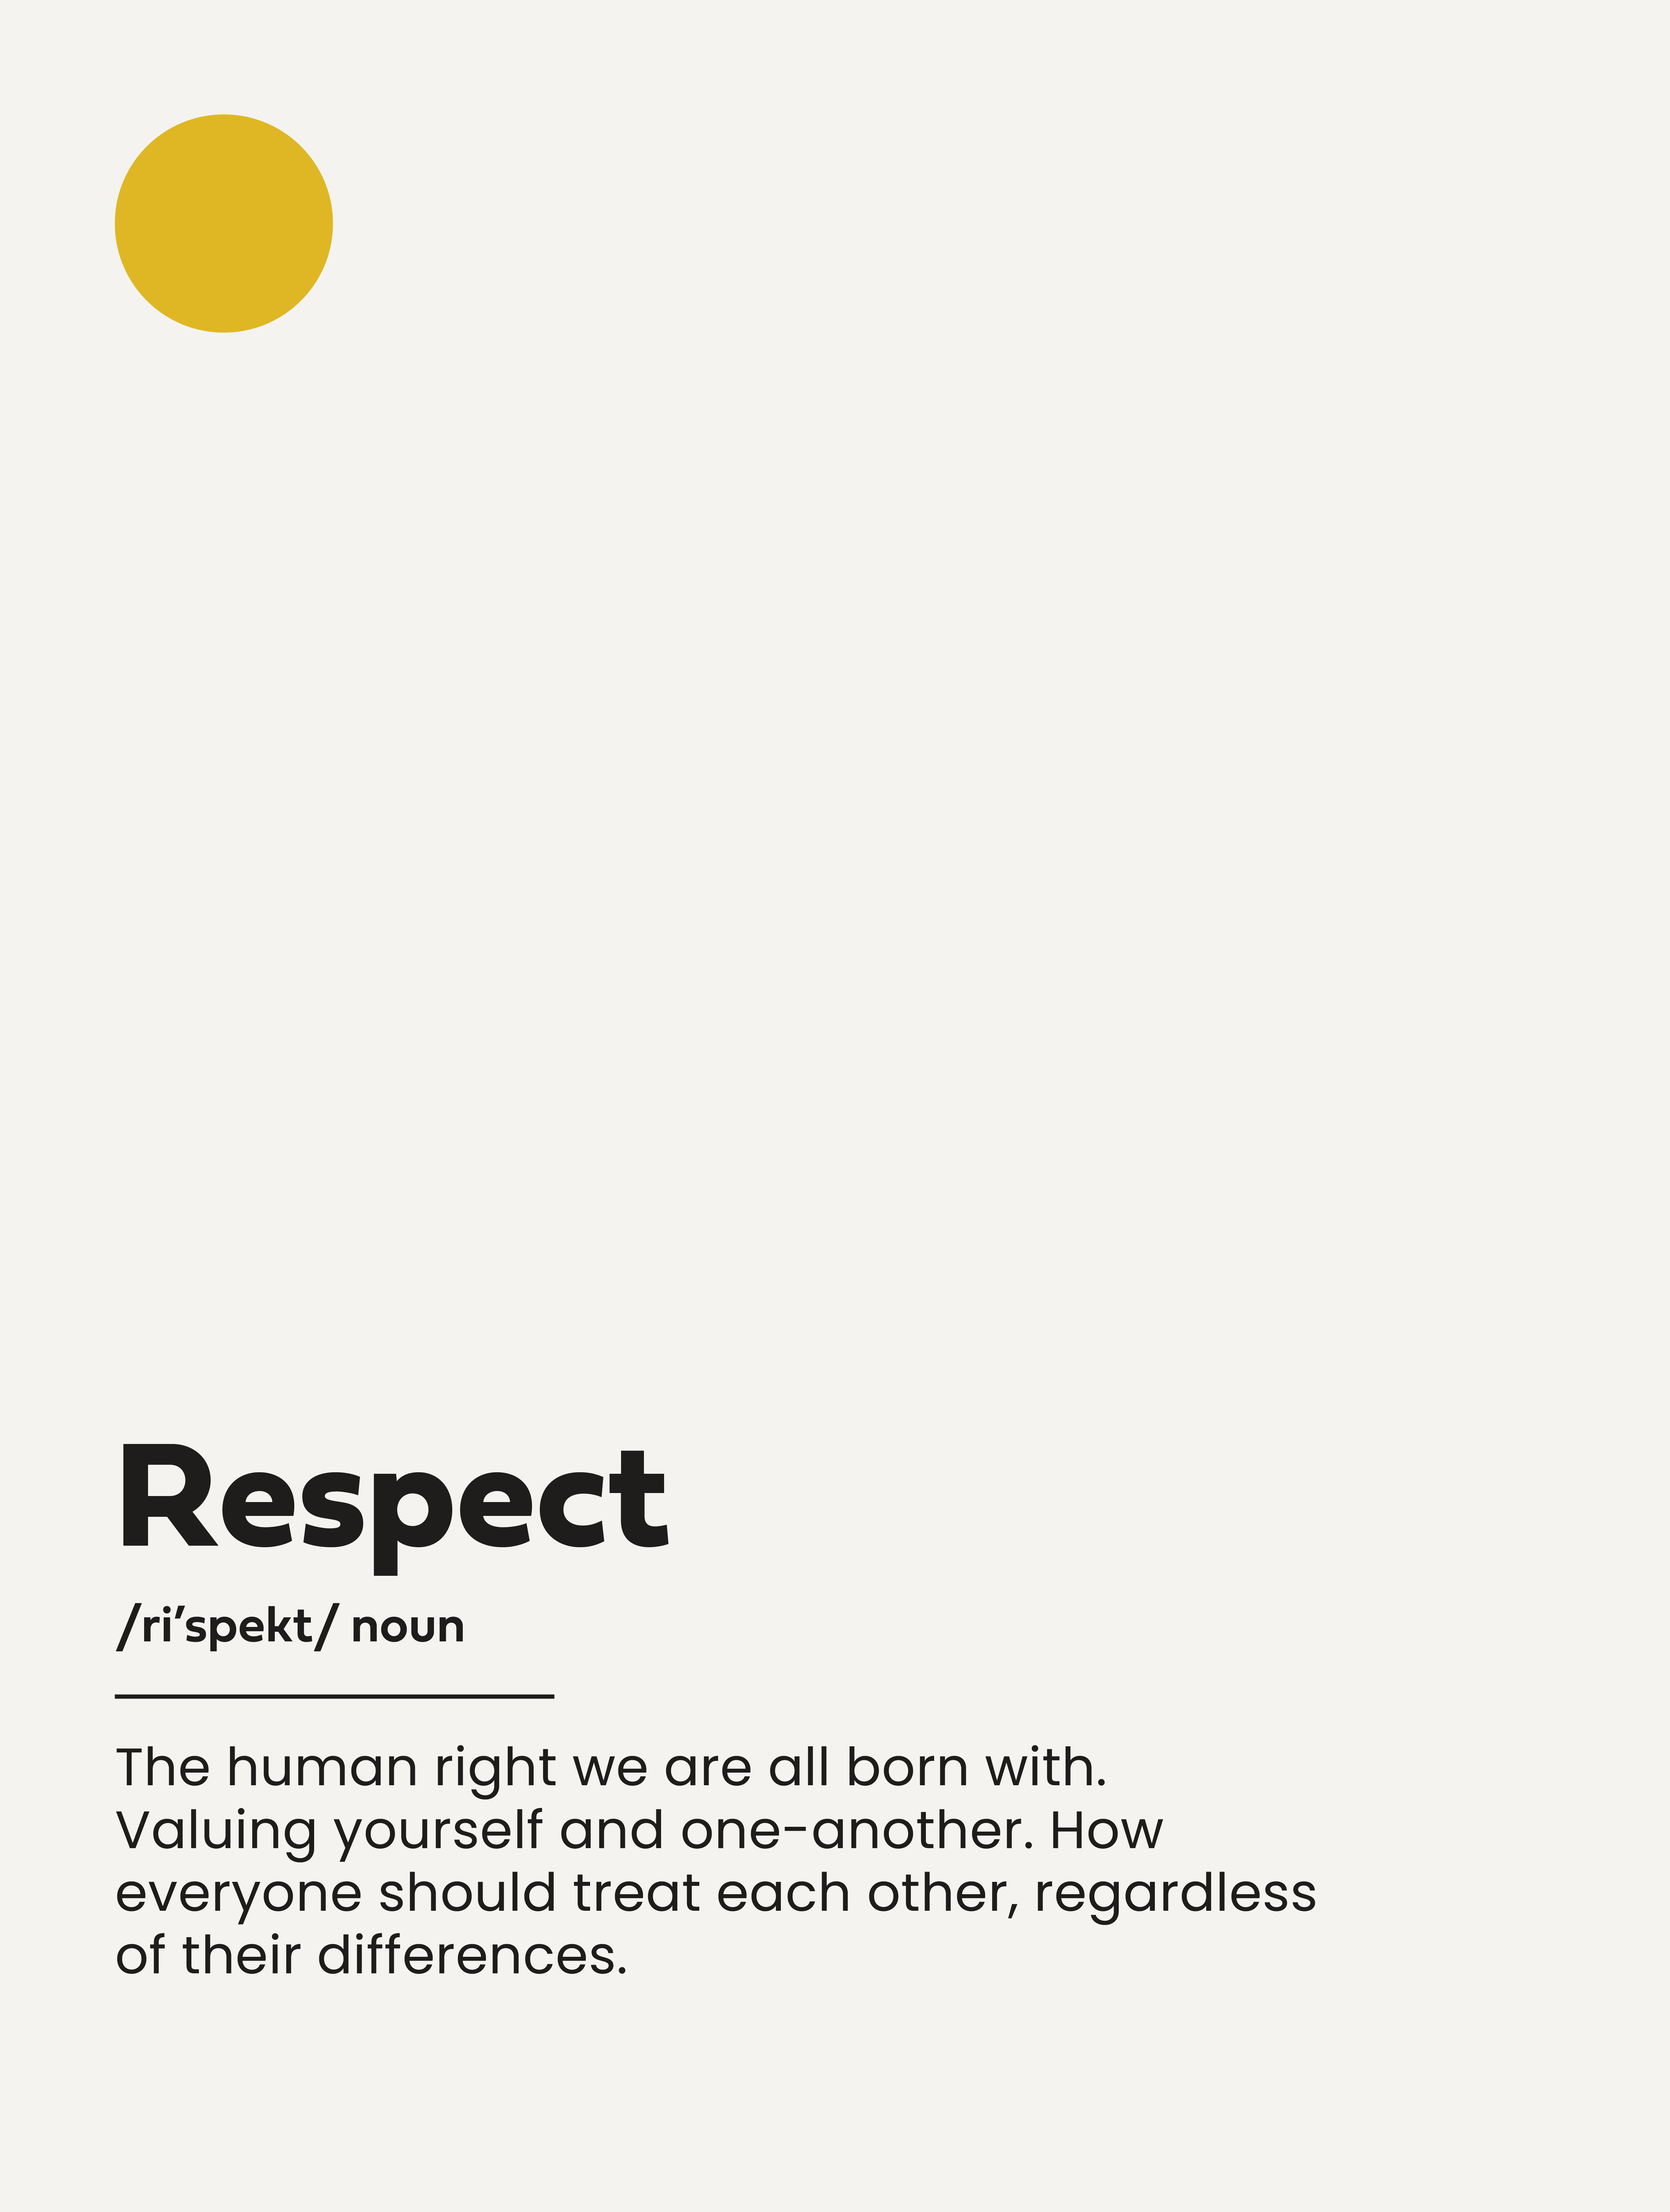 Our Values - Respect